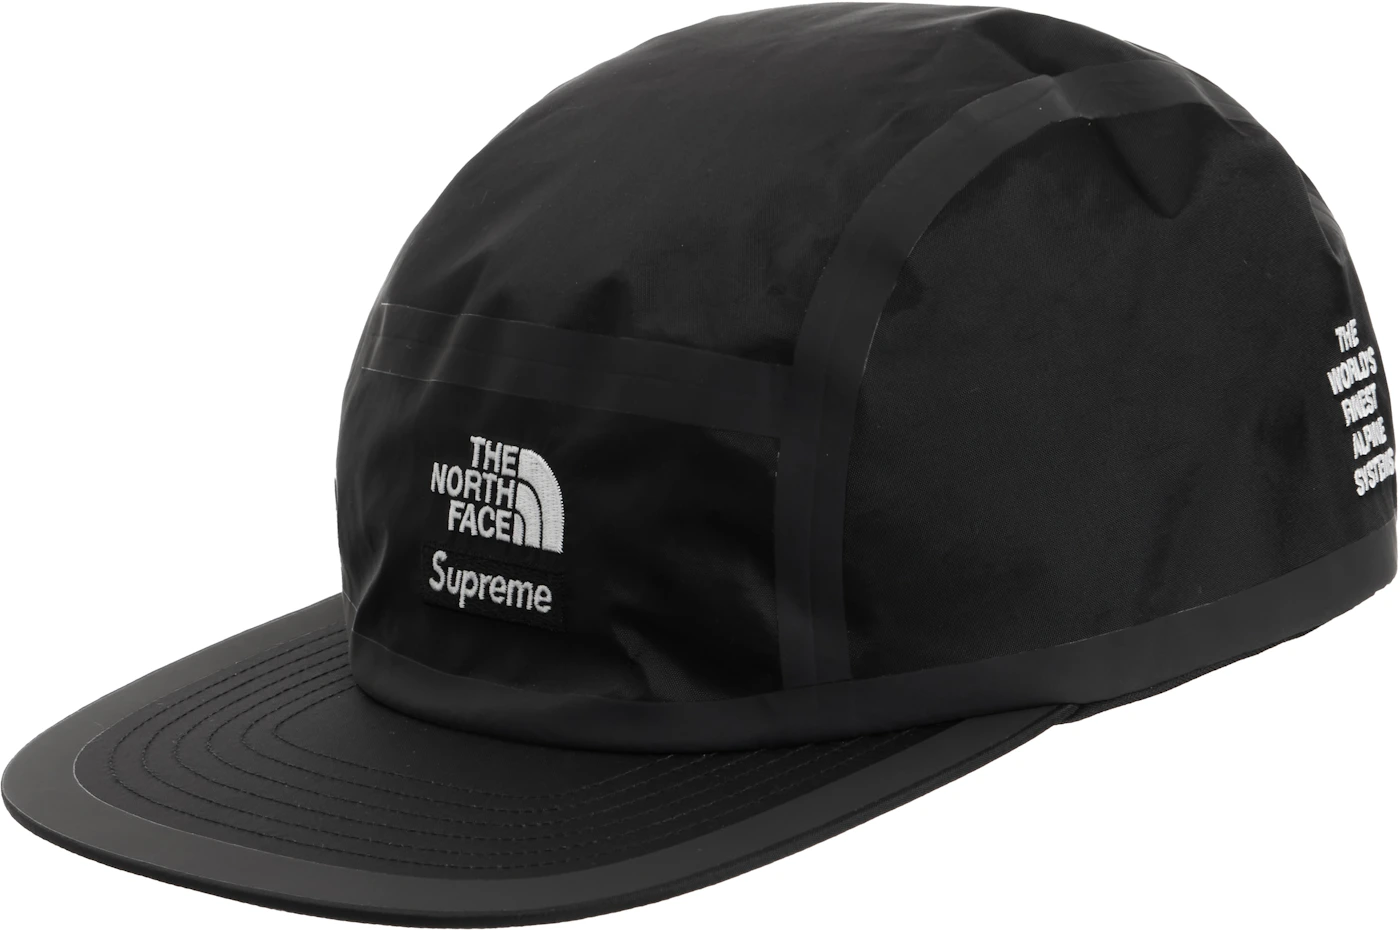 SUPREME SUEDE VISOR CAMP CAP BLACK SS23 WEEK 15 (100% AUTHENTIC) BRAND NEW